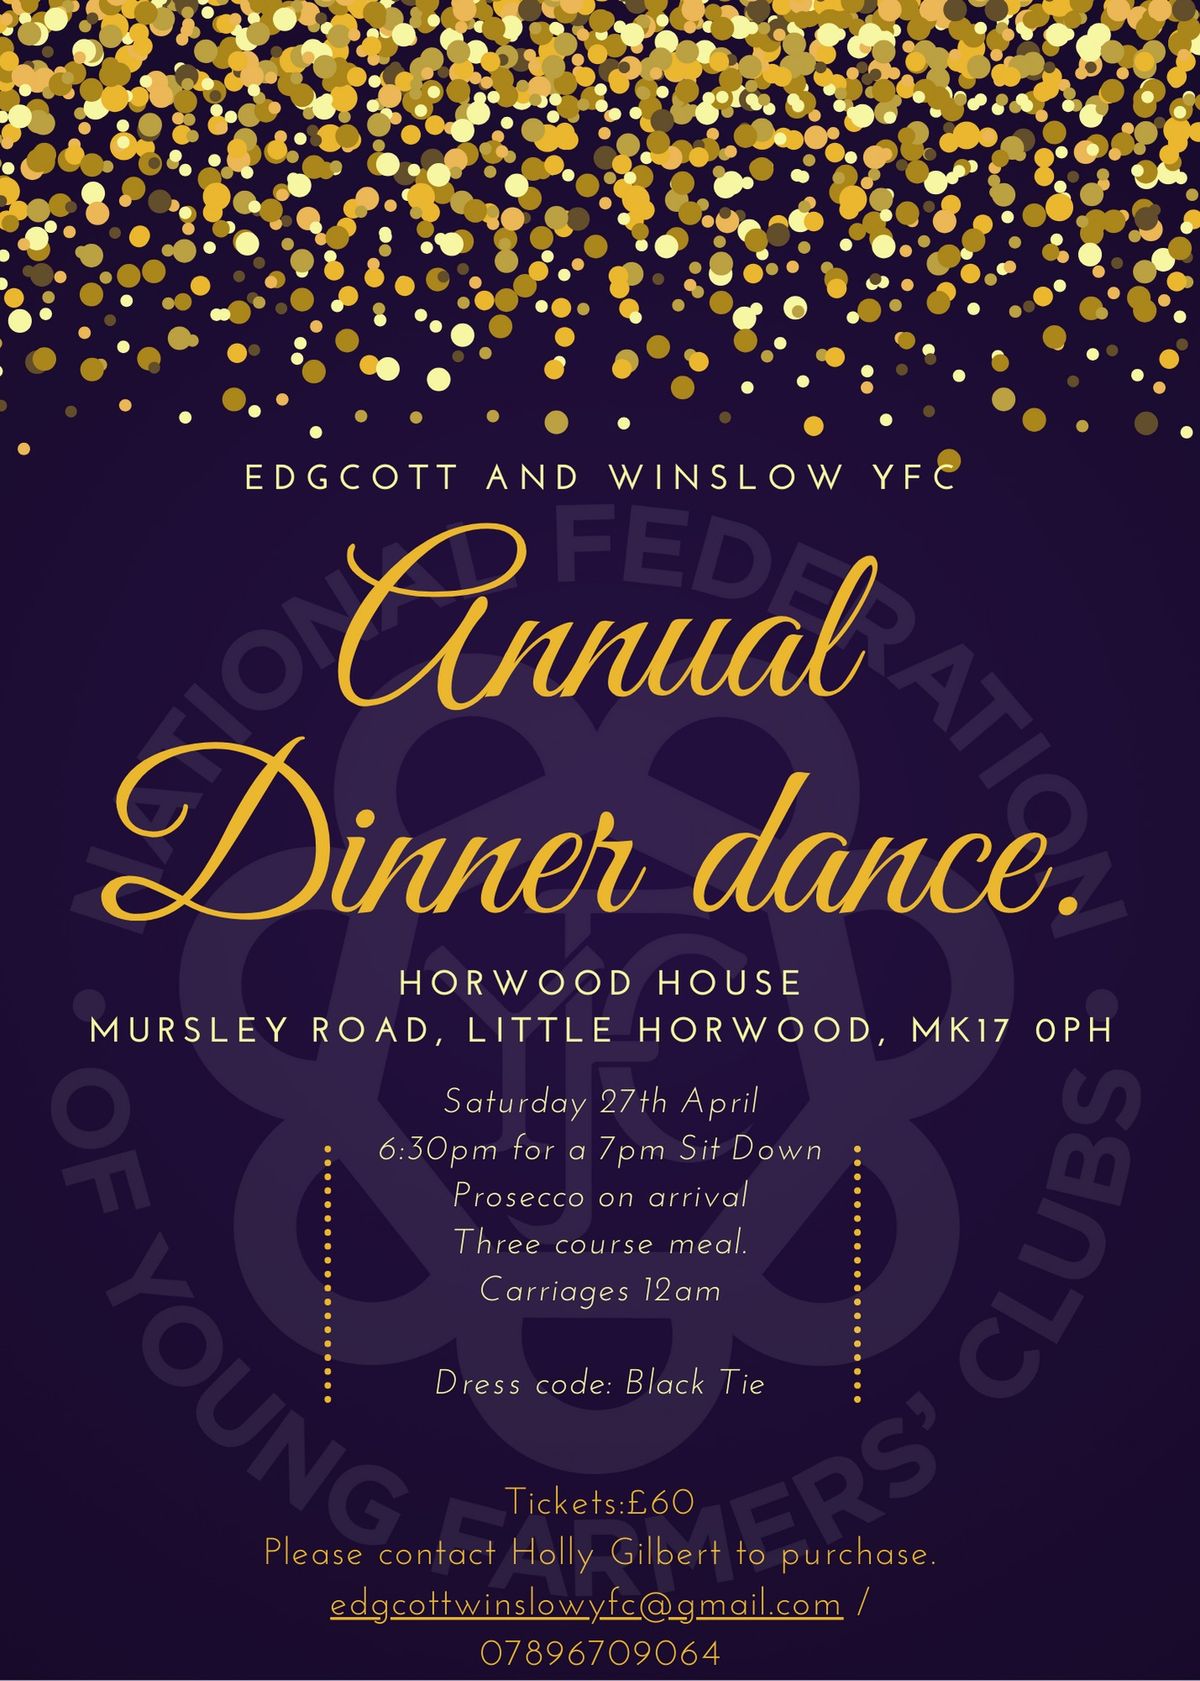 Edgcott and Winslow Dinner and Dance! 